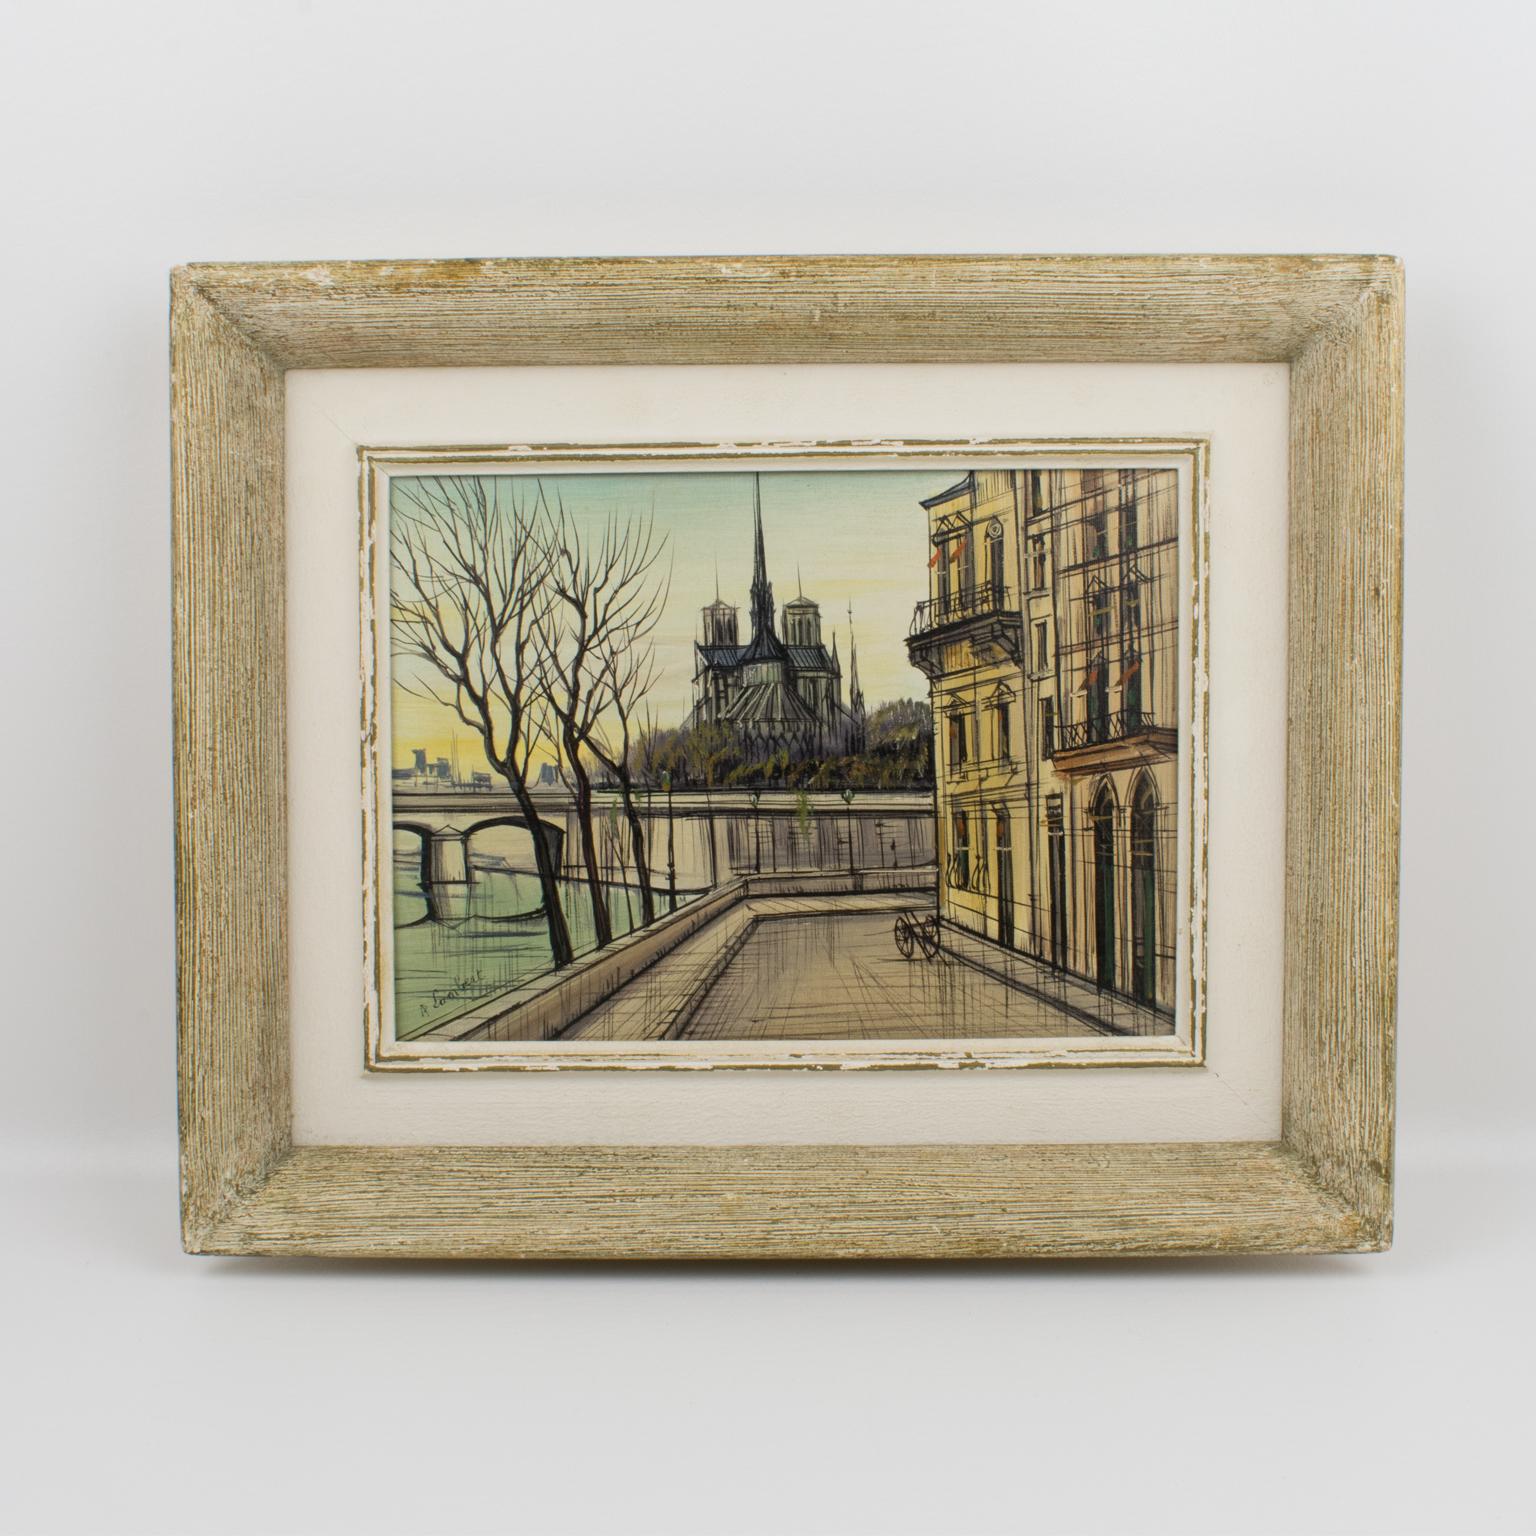 This oil on canvas painting, signed by Paul Lambert (1910-1970), is stunning. Paul Lambert is a French painter known for his depiction of Parisian scenes. 
This artwork is typical of his Paris cityscapes, done with sharp black lines and muted